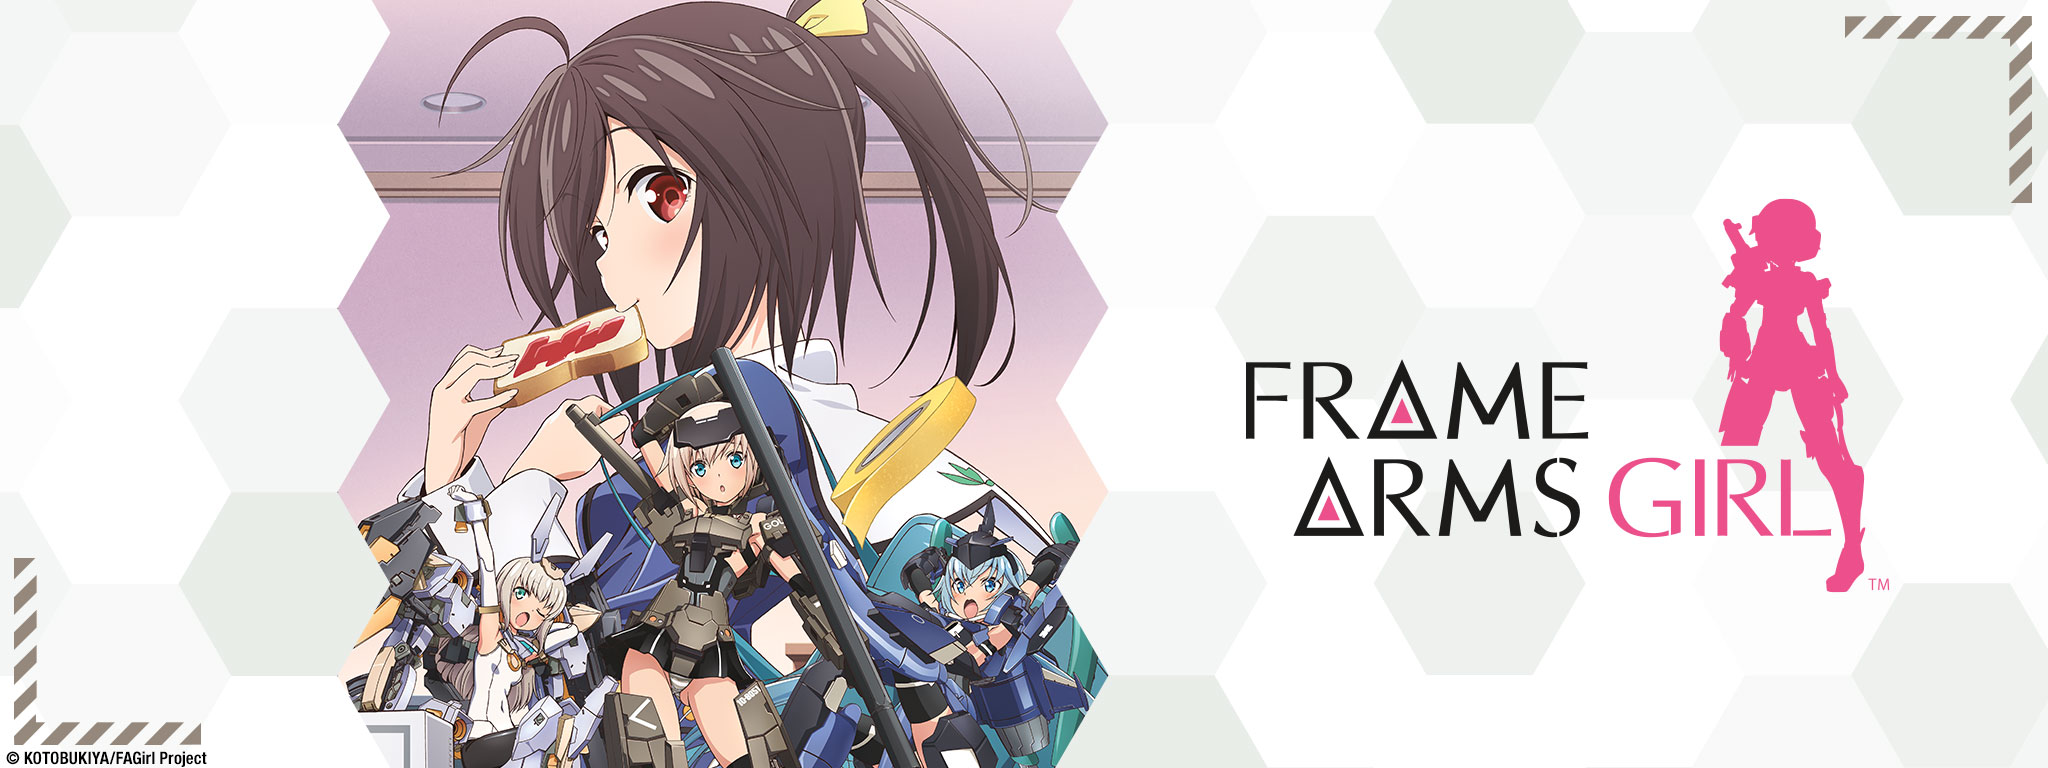 Title Art for Frame Arms Girl